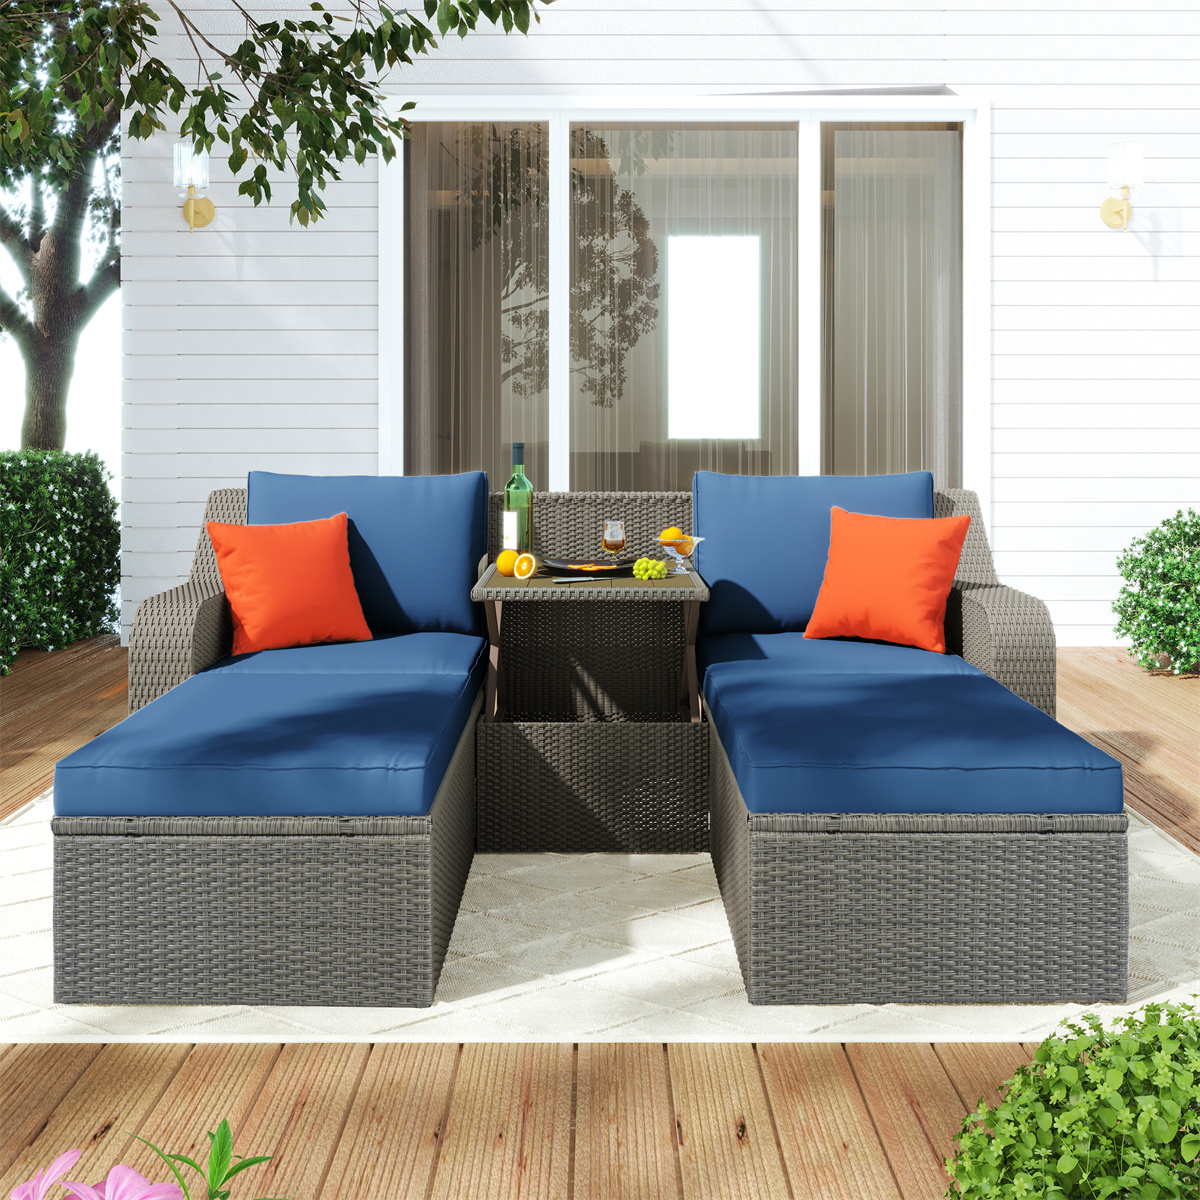 ARCTICSCORPION Patio Wicker Furniture Set,3-Piece Sectional Wicker Sofa with Cushions,Pillows,Ottomans and Lift Top Coffee Table,Outdoor Lounge Chair Conversation Set for Garden Backyard Deck,Blue - image 2 of 7